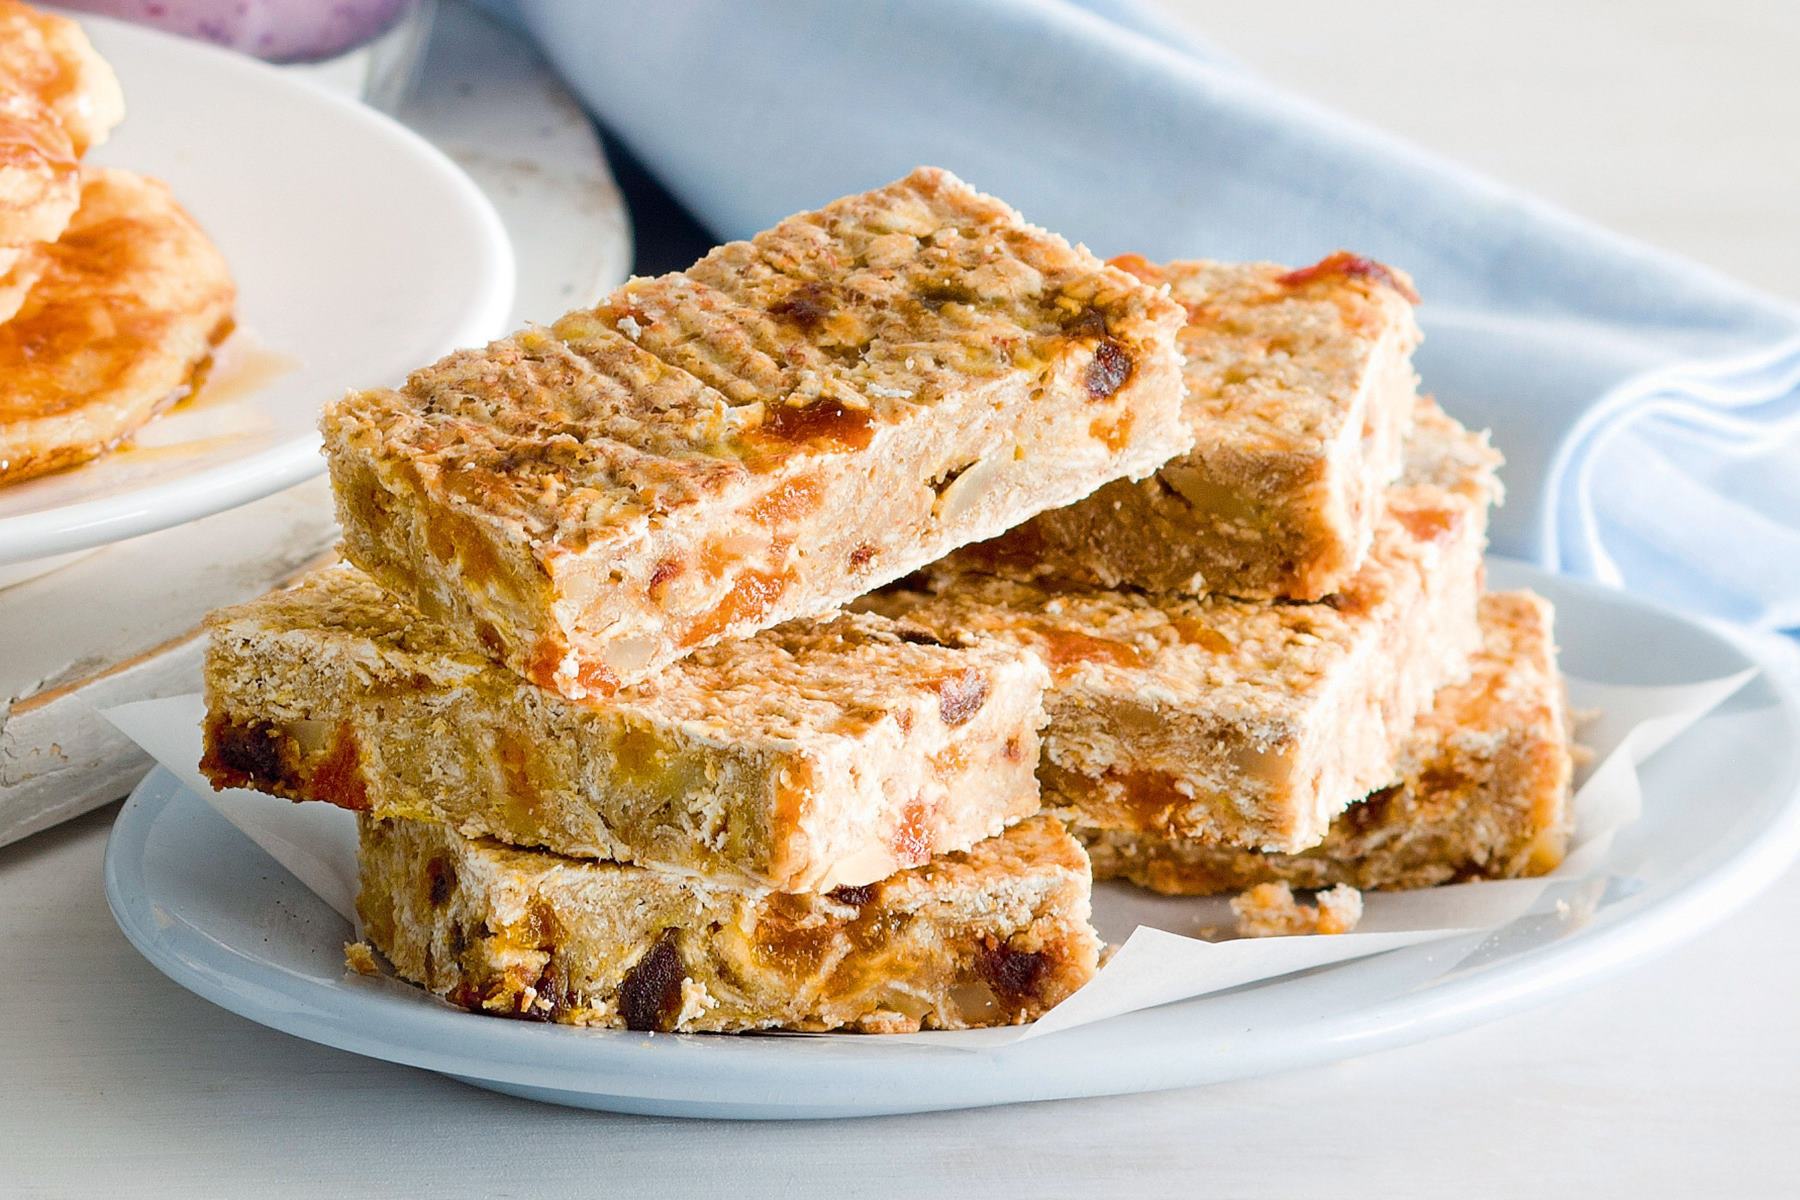 Try These Banana Oat Bars For An Energy Boost While Running